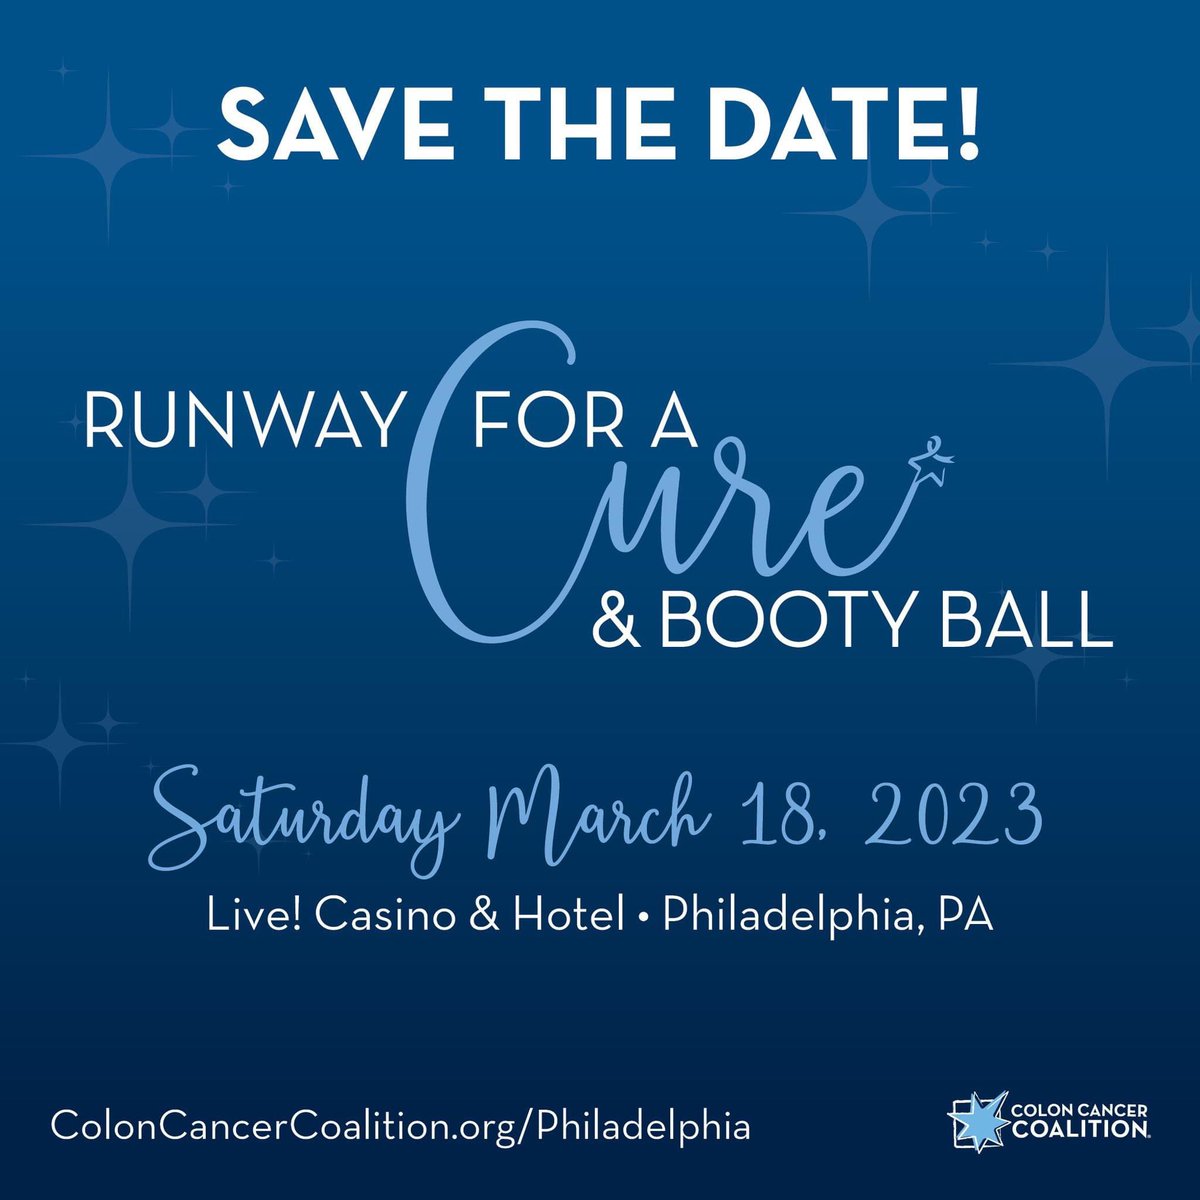 Have you or loved one been dx with #coloncancer? Now accepting nominations: Fashion Show/Booty Ball 3/18/23 @LiveCasinoPHL Tell us about yourself or nominee in 300 words or less, send to mariagrasso@getyourrearingear.com @ColonCancerCoal @TJUHospital @FoxChaseCancer @PennCancer